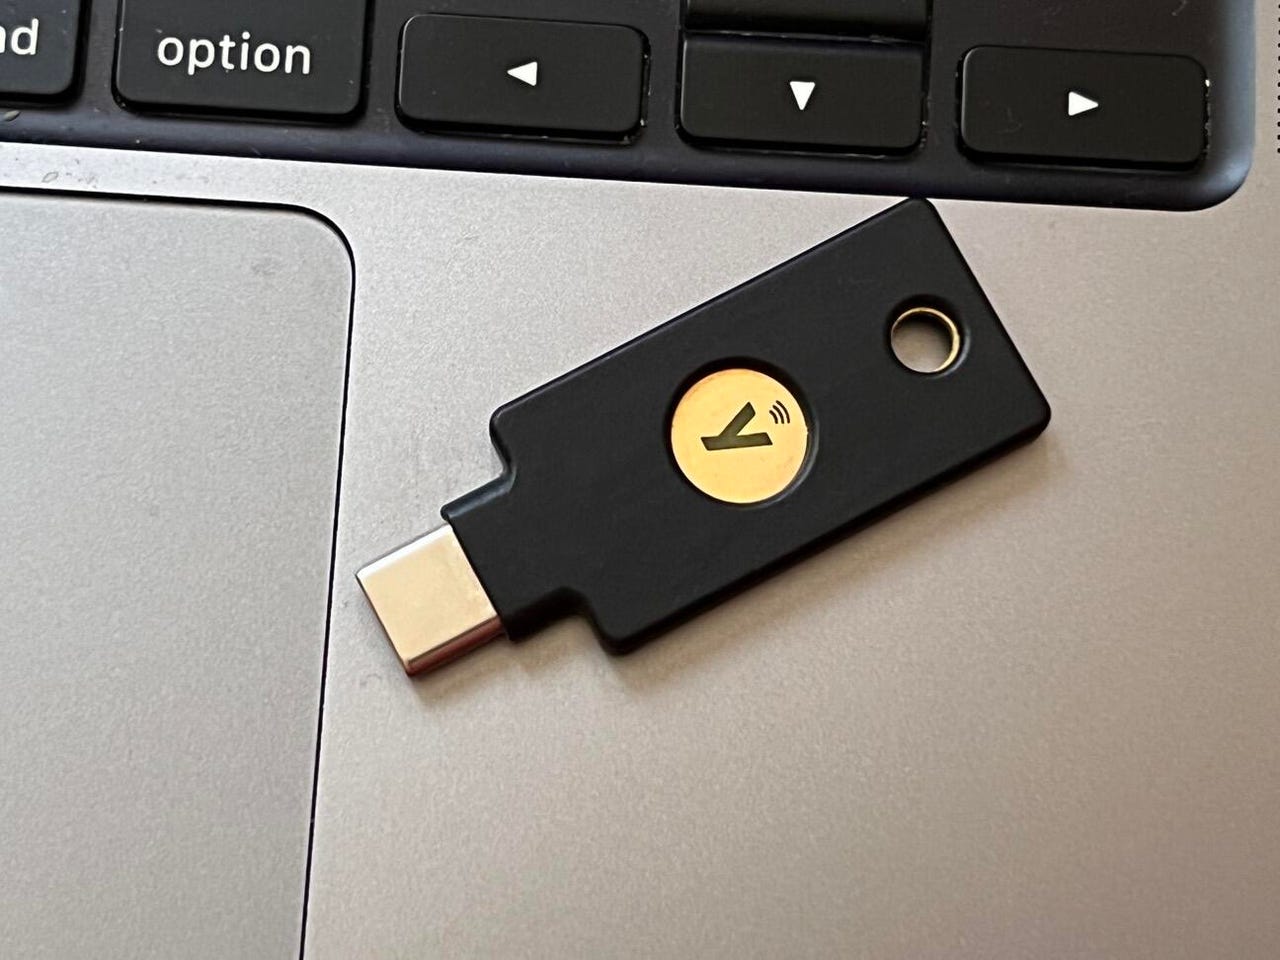 A FIDO2 security key -- the YubiKey 5C NFC -- offer a high level of protection, but will need better security to defend against quantum computer attacks